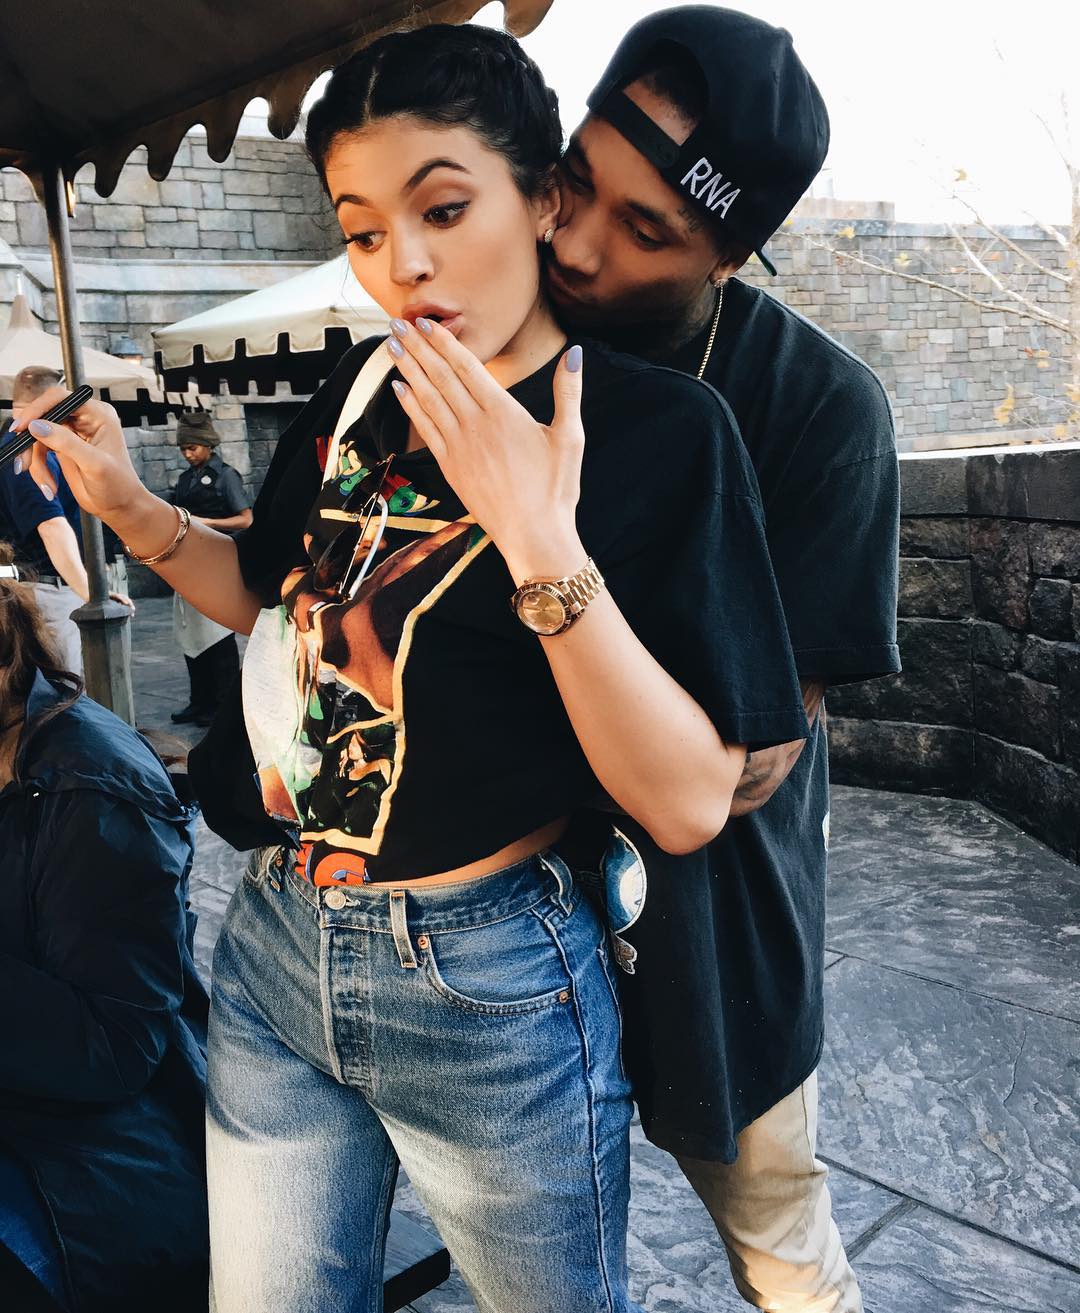 Tyga Thinks Kylie “Messed Up” By Getting Pregnant With Travis Scott